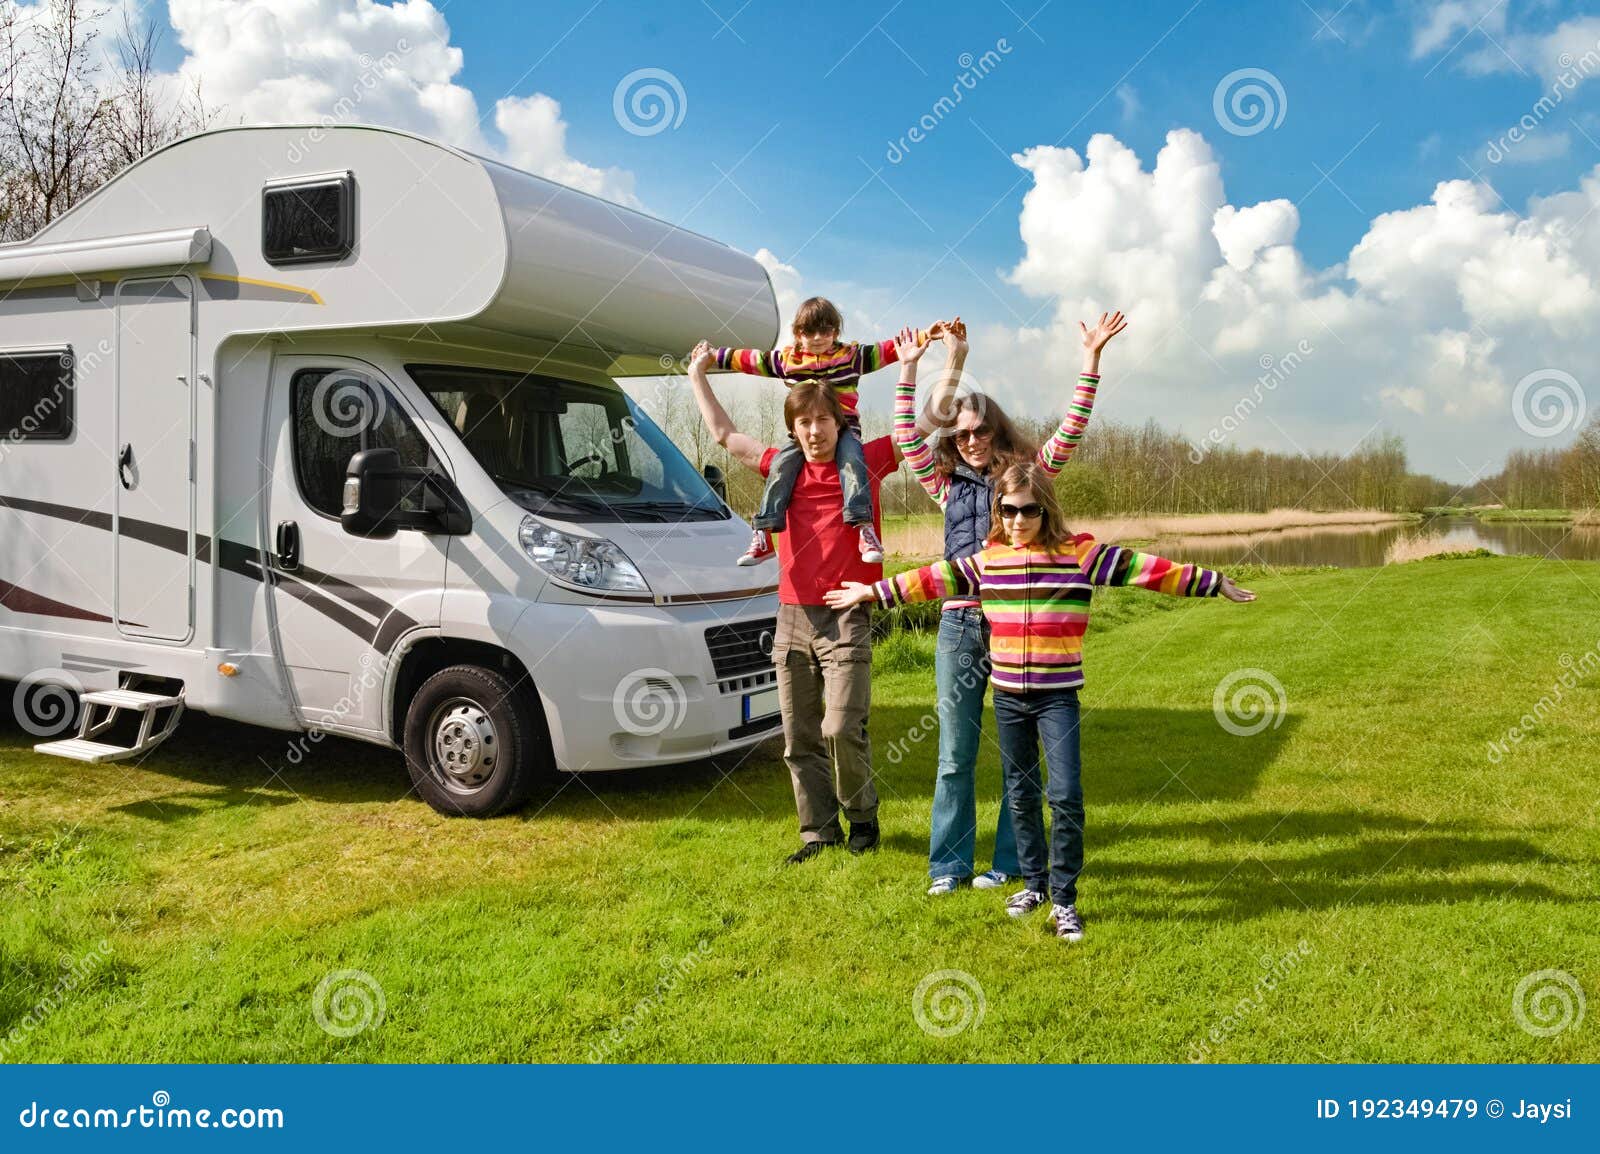 Family Vacation Travel Holiday Trip In Motorhome Rv Stock 